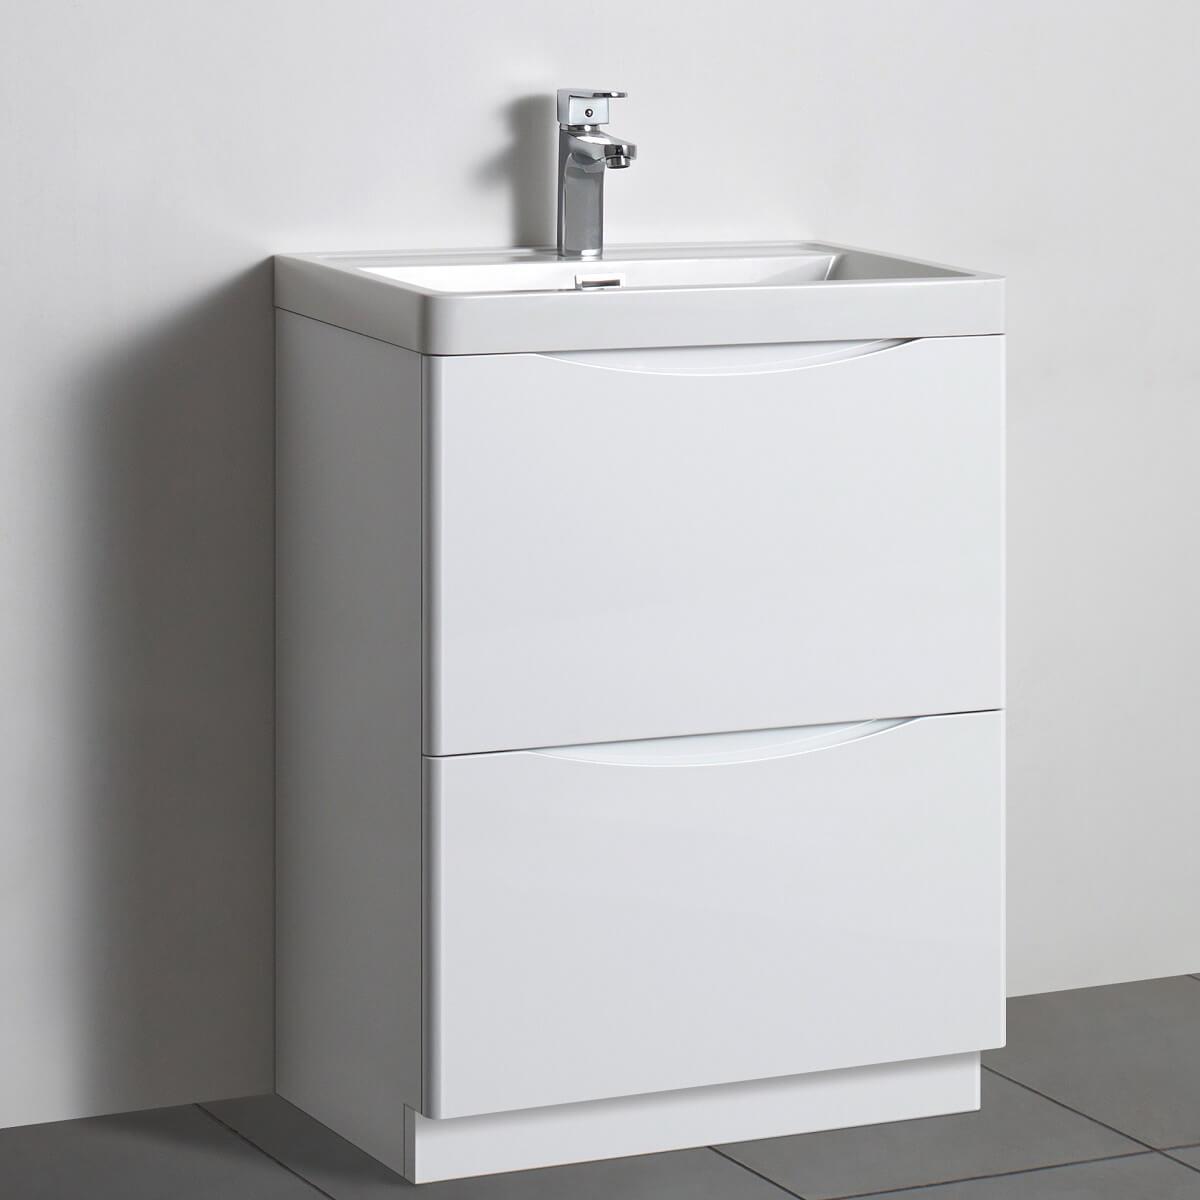 An image of Naples Smile White Gloss 600Mm Bathroom Floor Standing Vanity Unit With Basin - ...